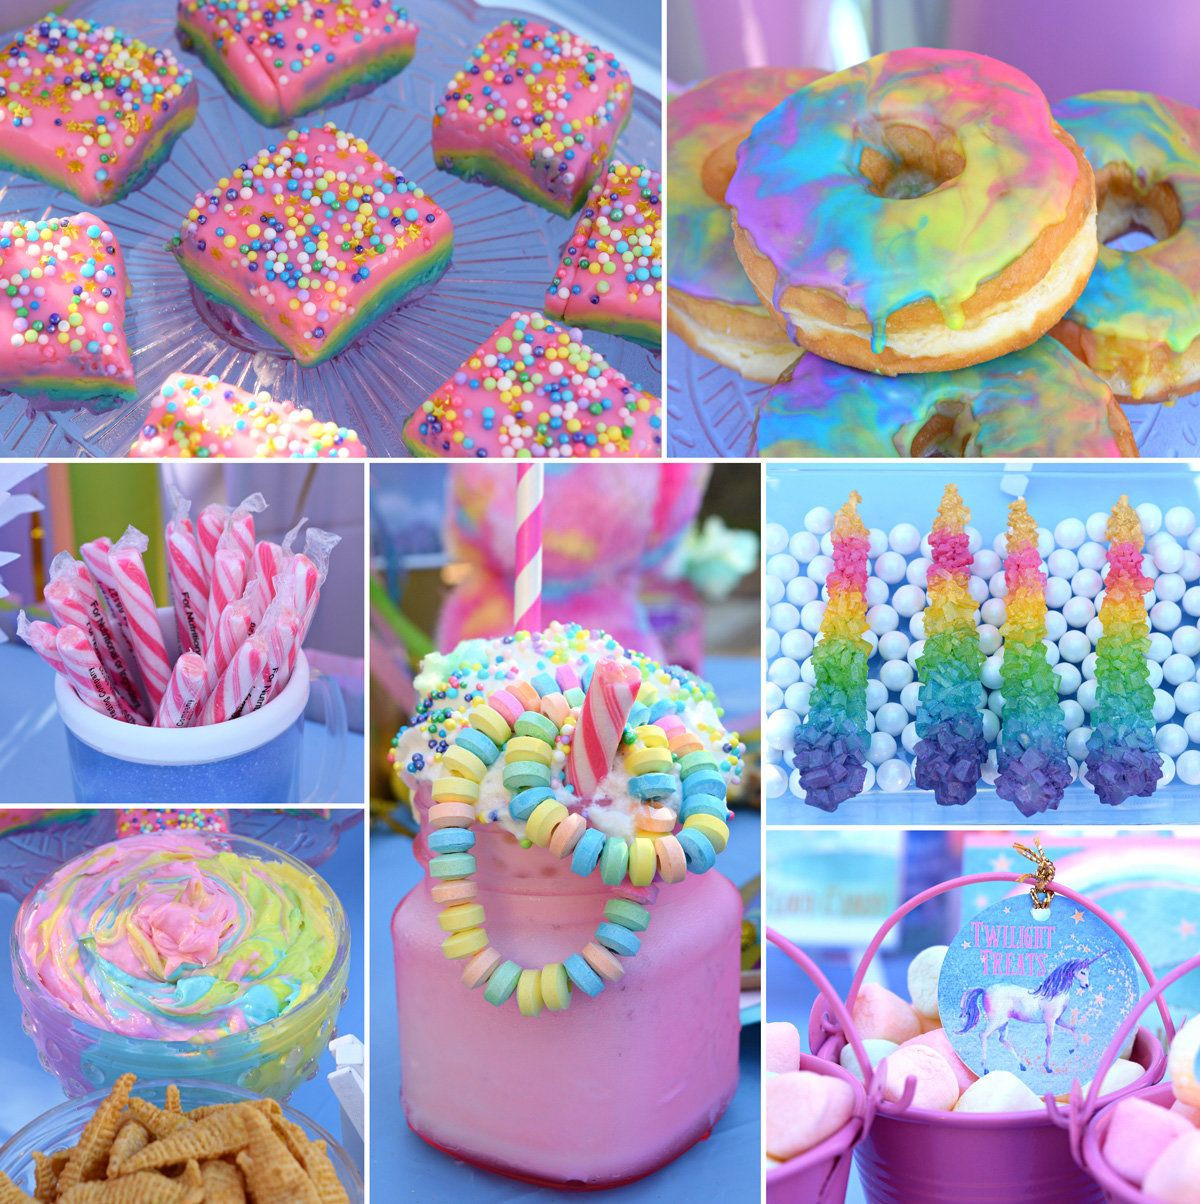 Ideas For A Unicorn Child'S Birthday Party
 Unicorn food Party Ideas in 2019